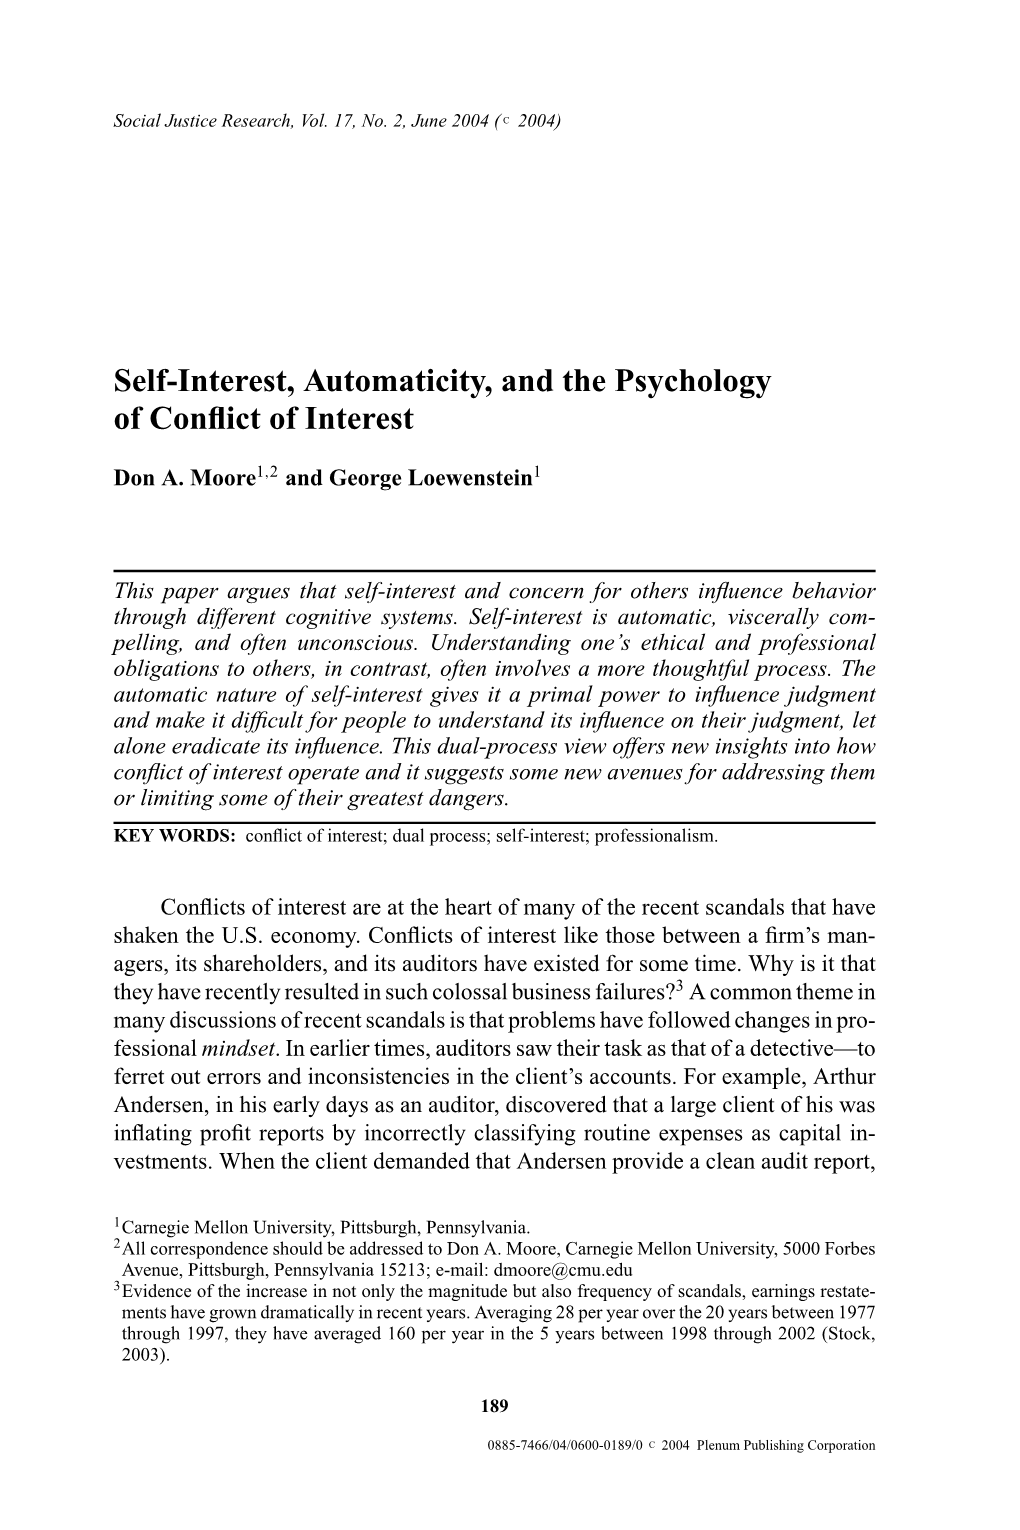 Self-Interest, Automaticity, and the Psychology of Conflict of Interest